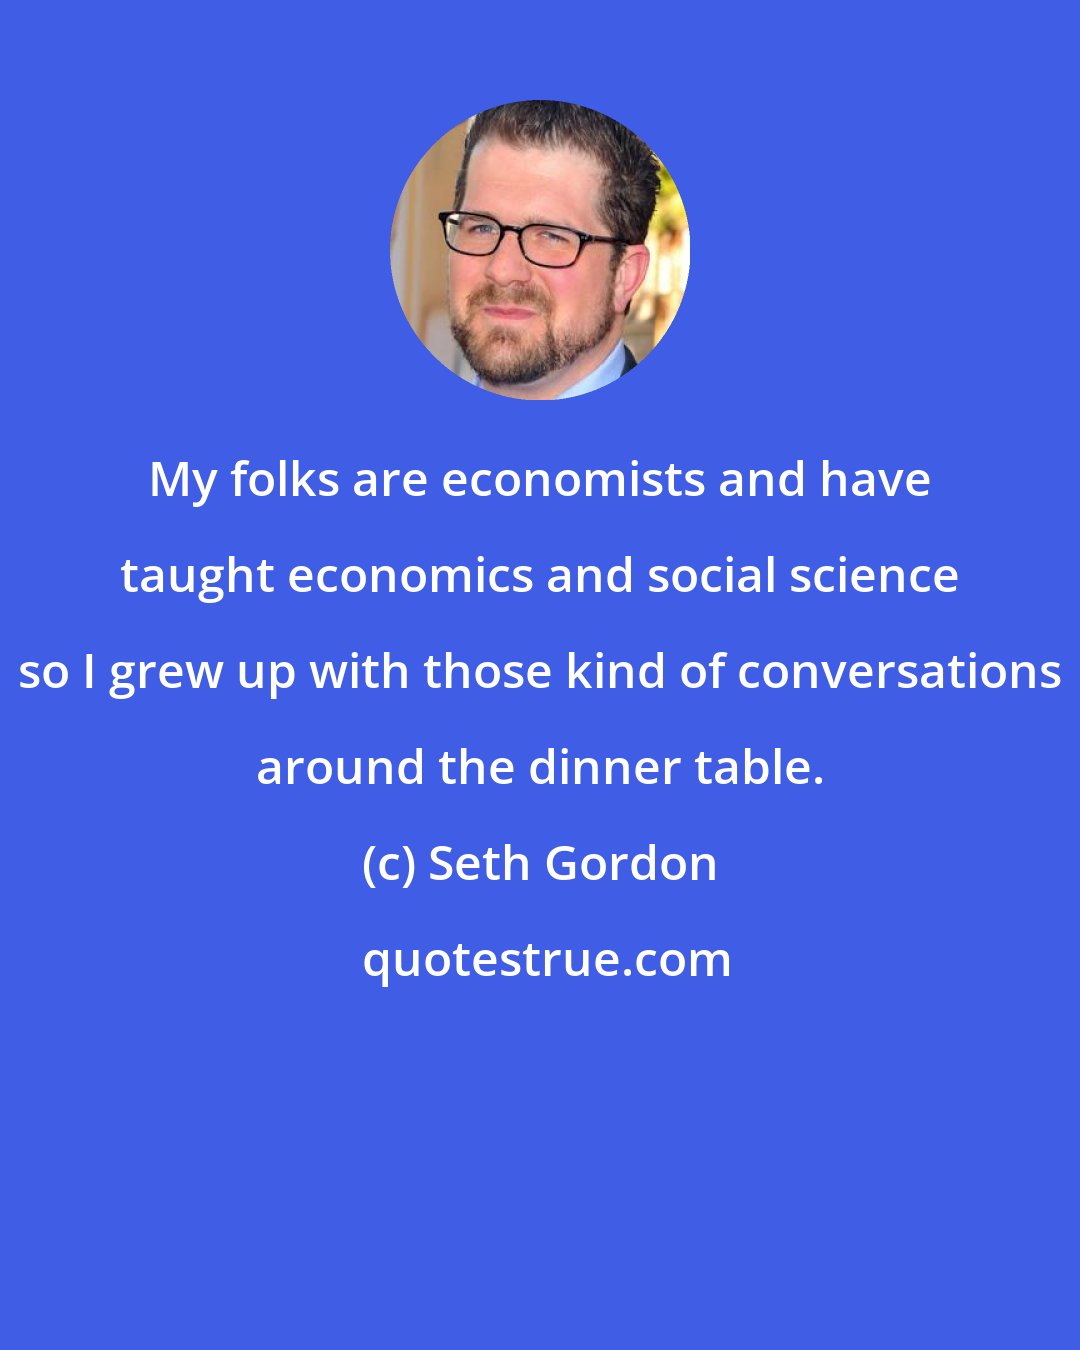 Seth Gordon: My folks are economists and have taught economics and social science so I grew up with those kind of conversations around the dinner table.